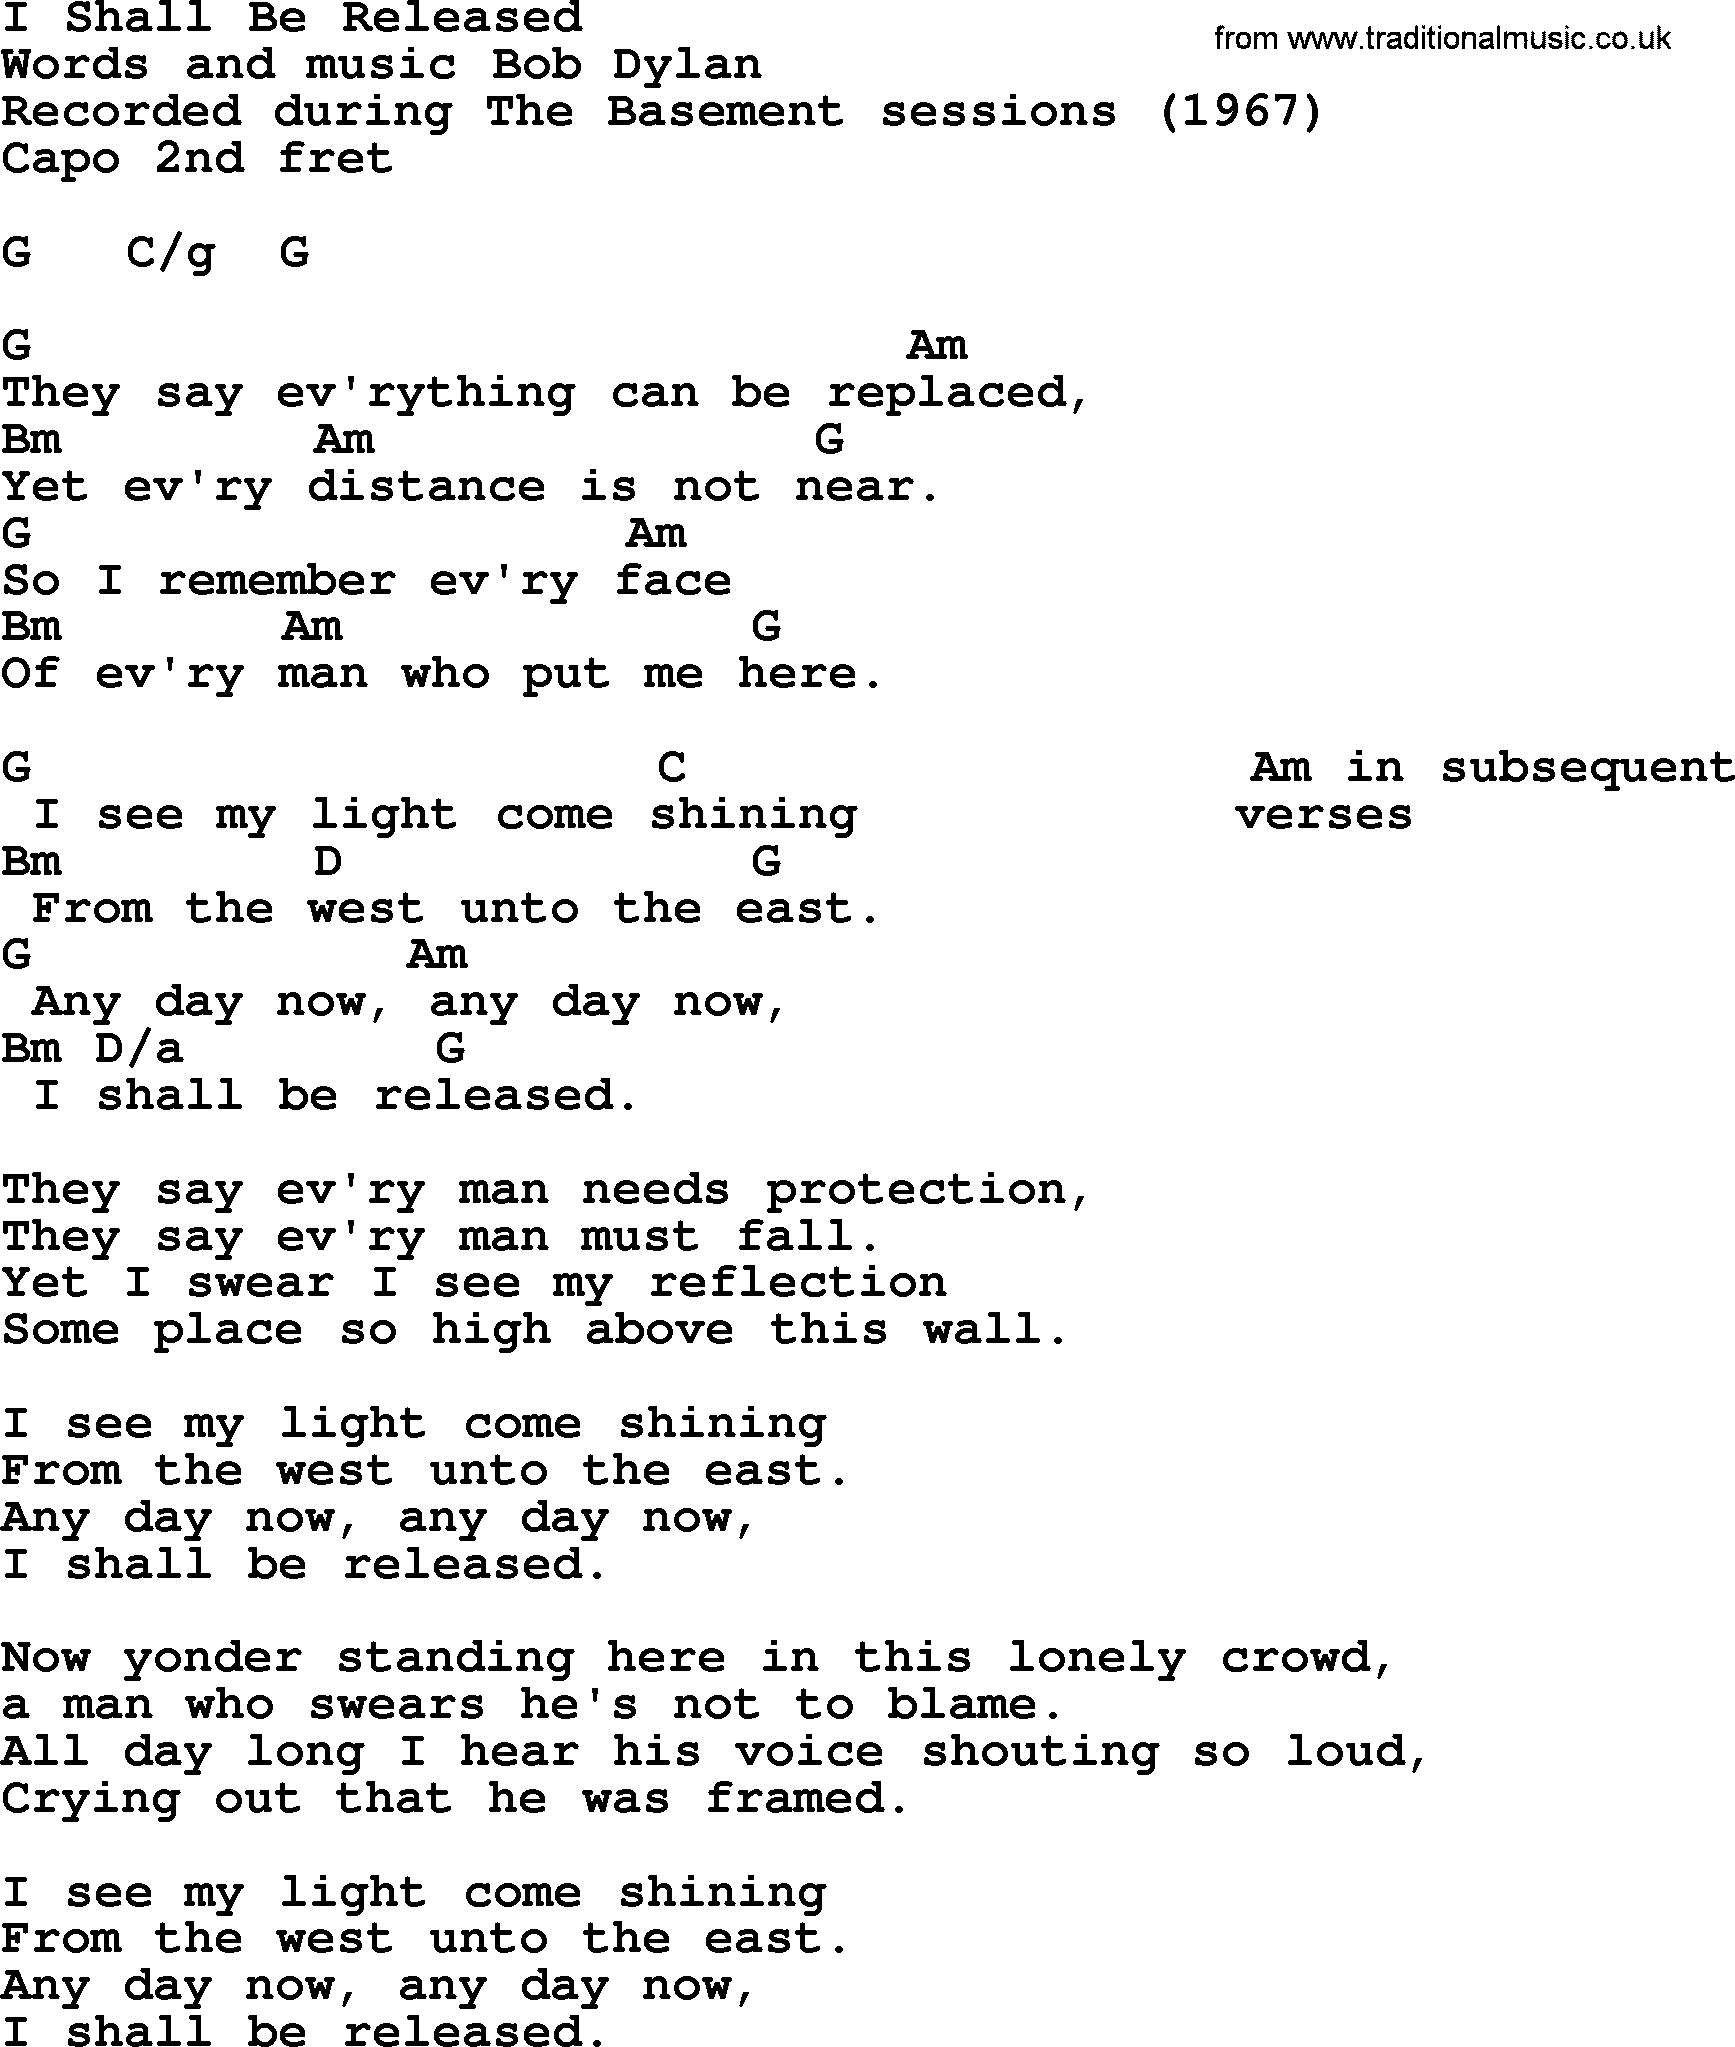 Bob Dylan song, lyrics with chords - I Shall Be Released